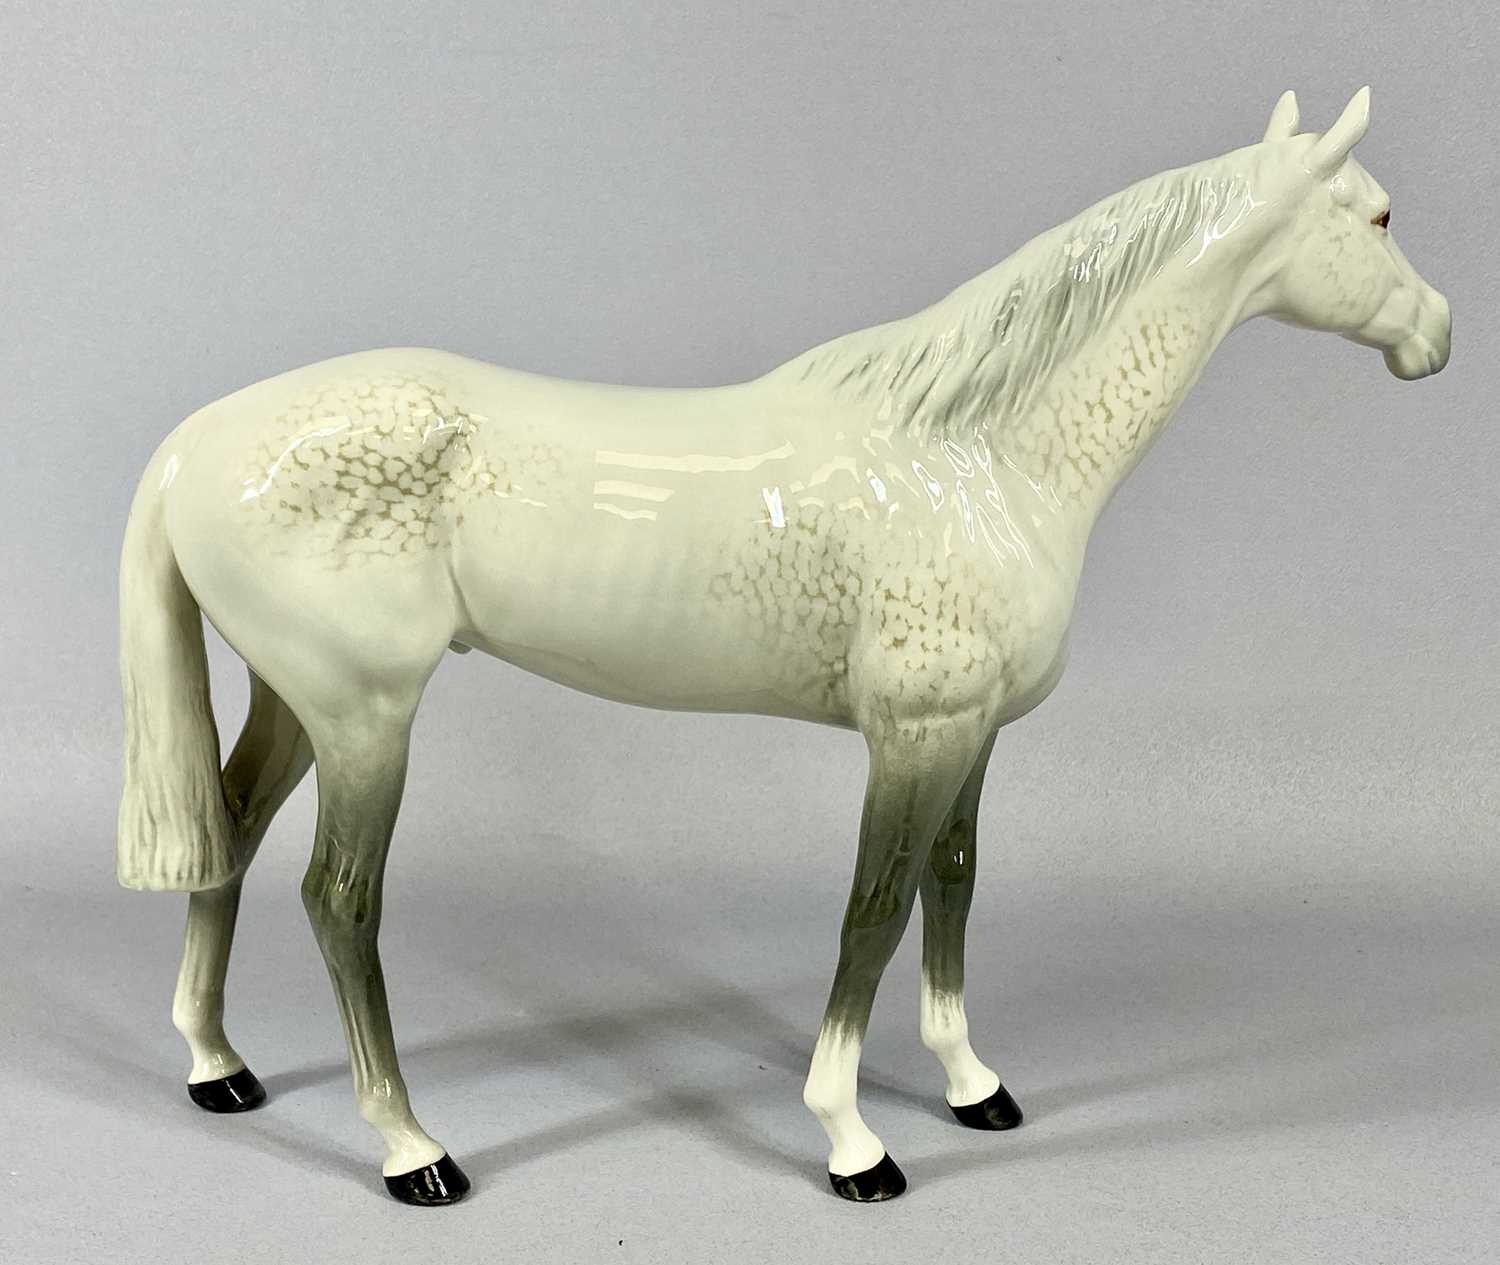 BESWICK AND ROYAL DOULTON ANIMAL FIGURINES, comprising, large Beswick dappled grey horse, 28 (h) x - Image 5 of 5